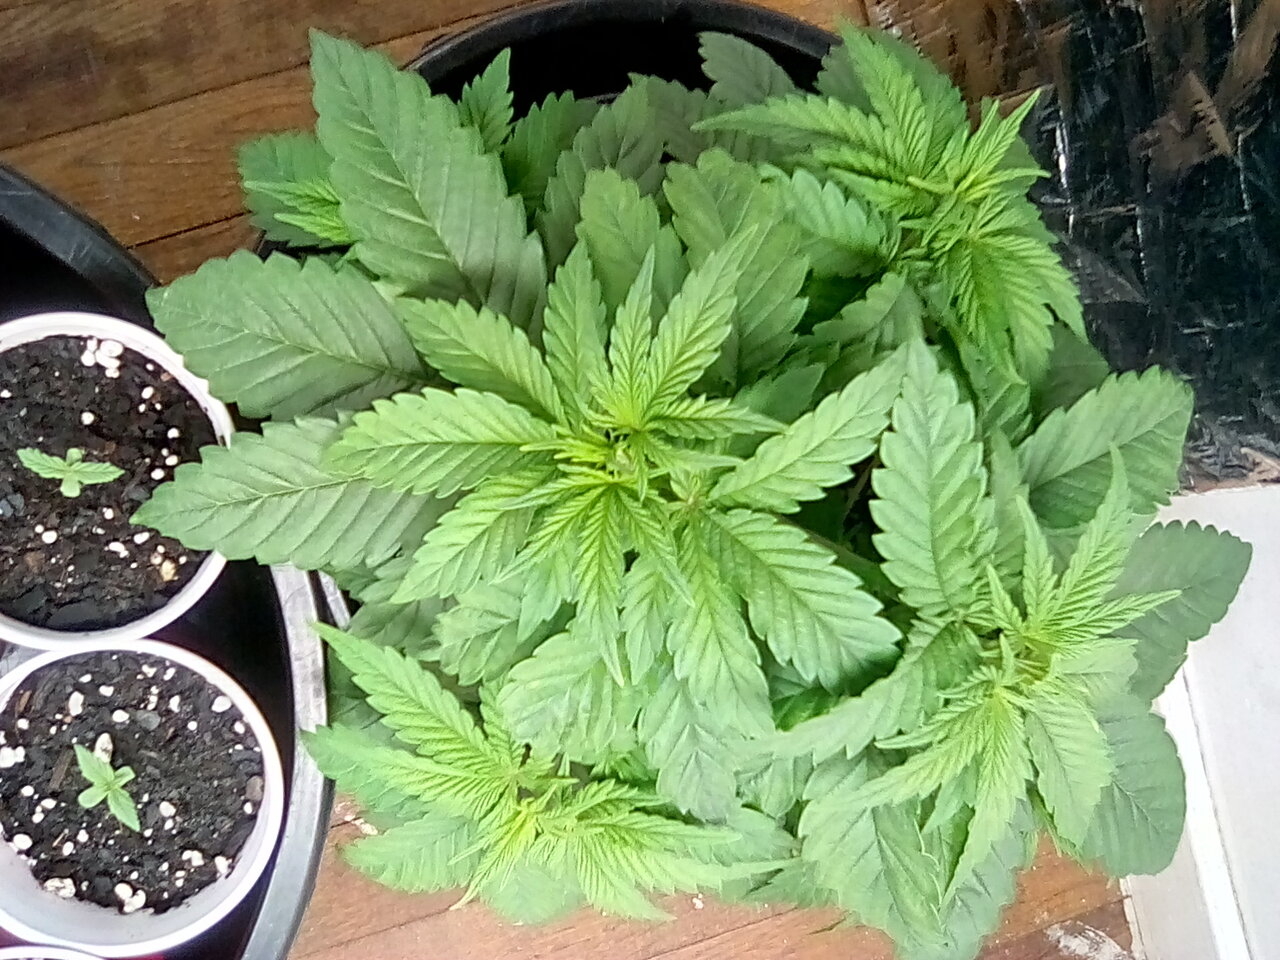 Day 24 for the Fruity pebbles mother plant topped and getting ready to give her clones.